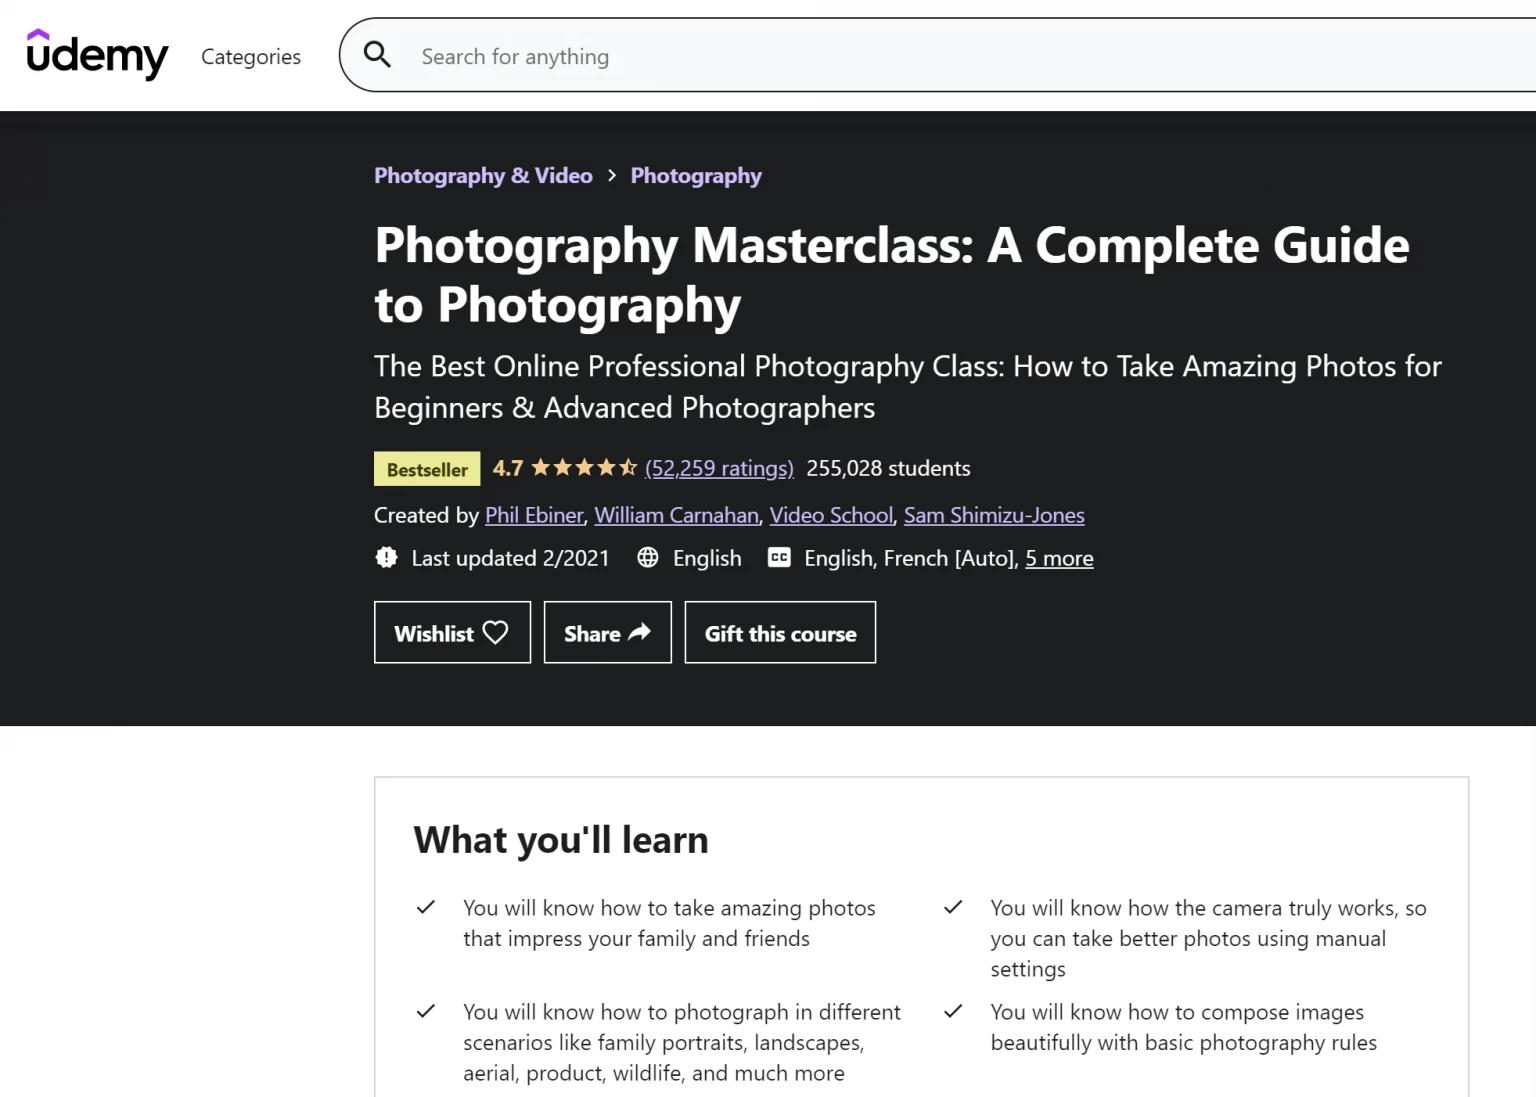 Udemy: Photography Masterclass, A Complete Guide to Photography